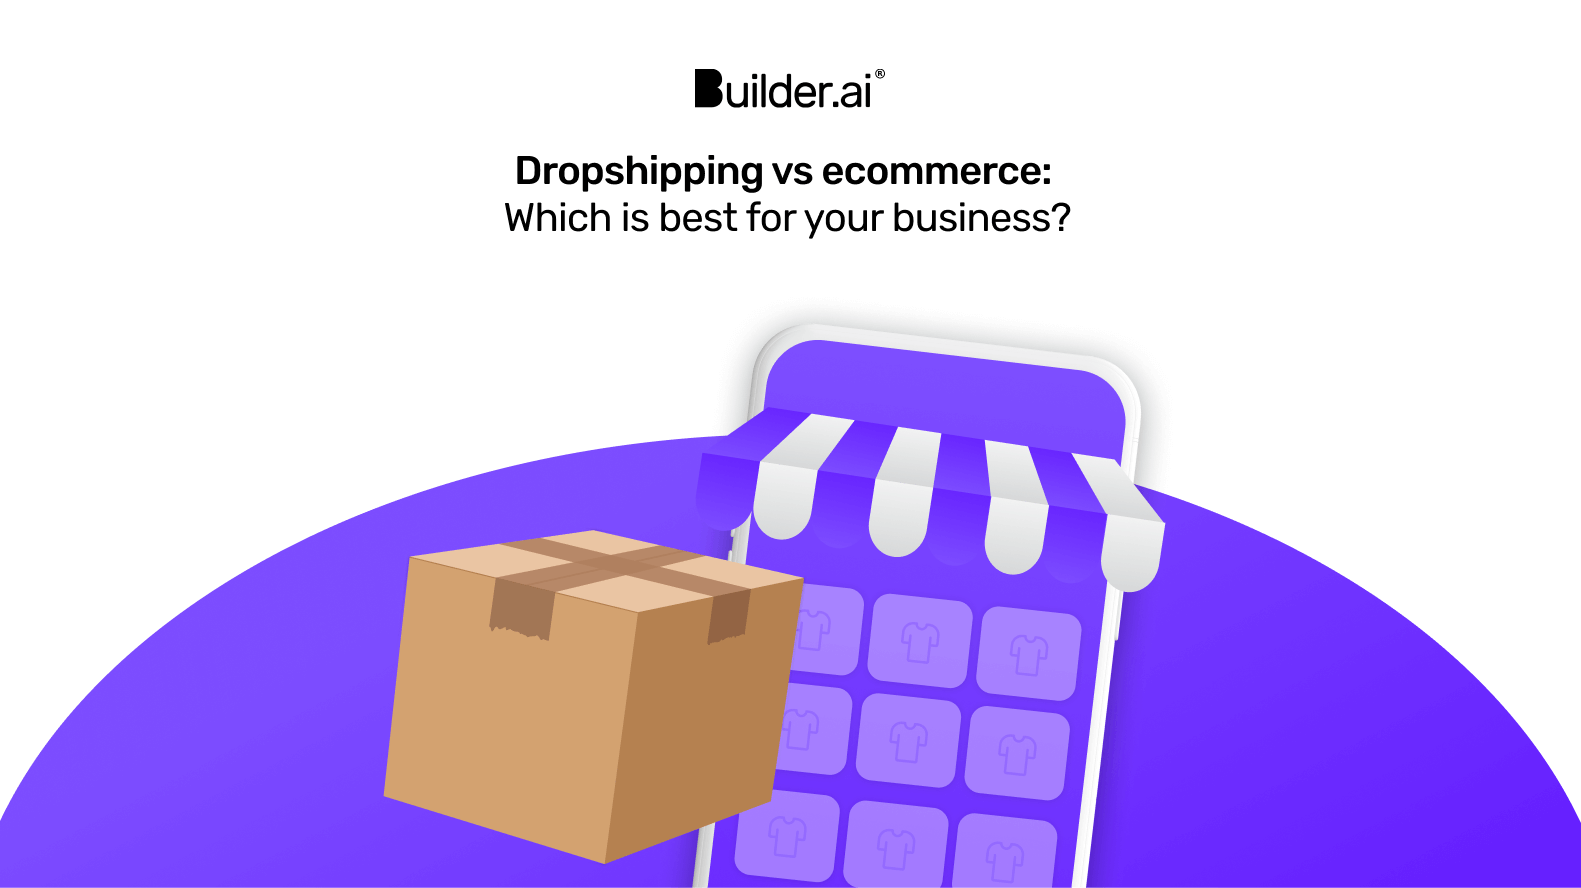 Dropshipping vs ecommerce: Which is best for your business?